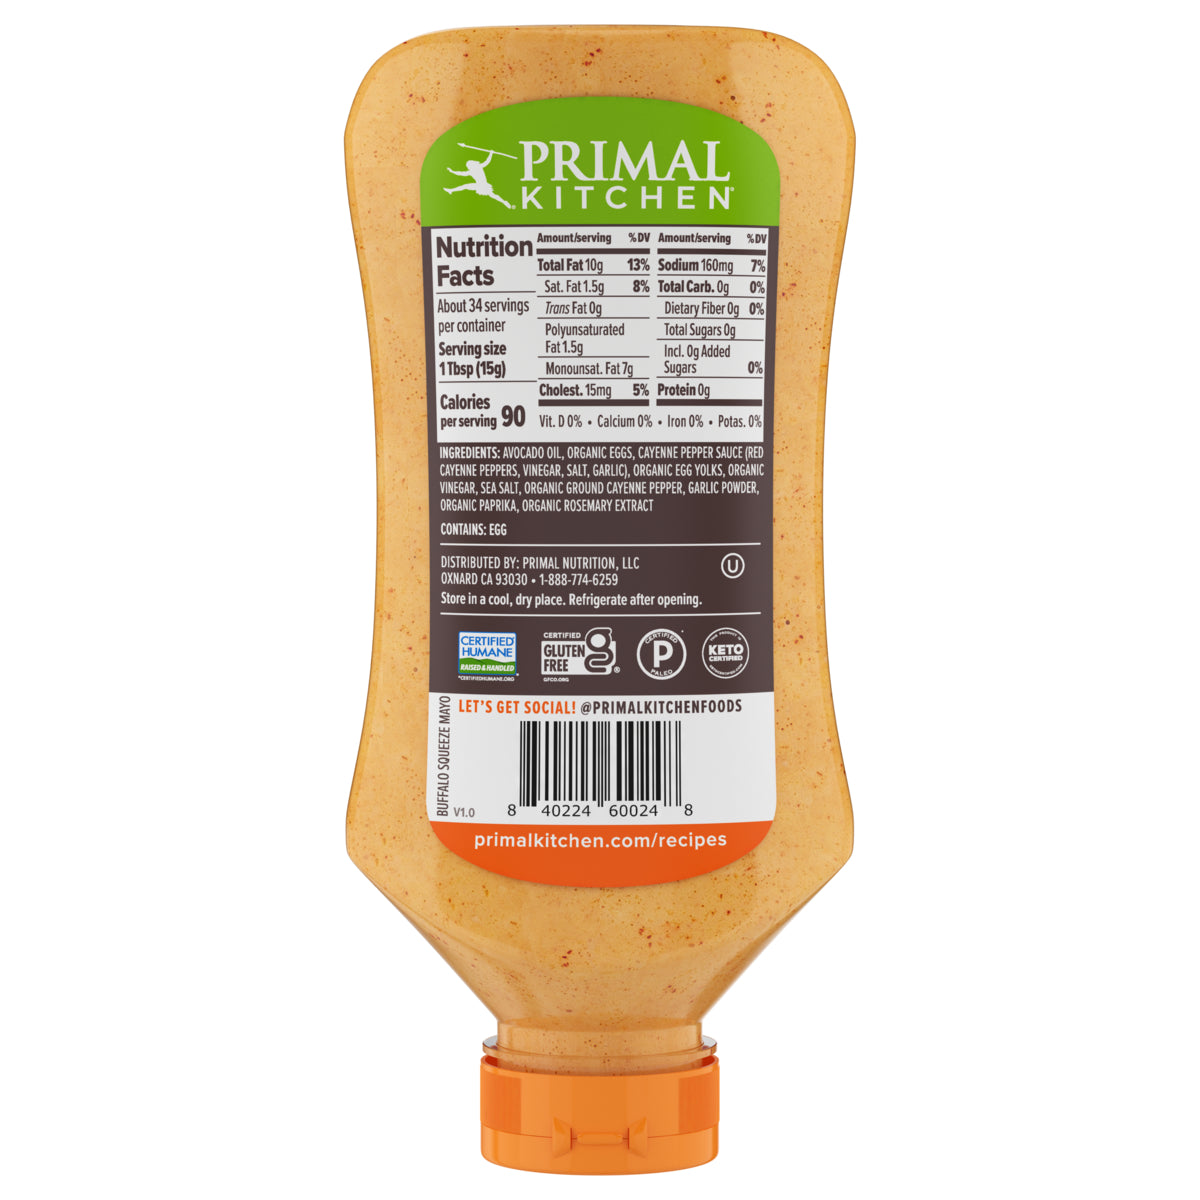 Nutritional label of a 17 oz squeeze bottle with an orange cap of Primal Kitchen Buffalo Mayo made with Avocado Oil.